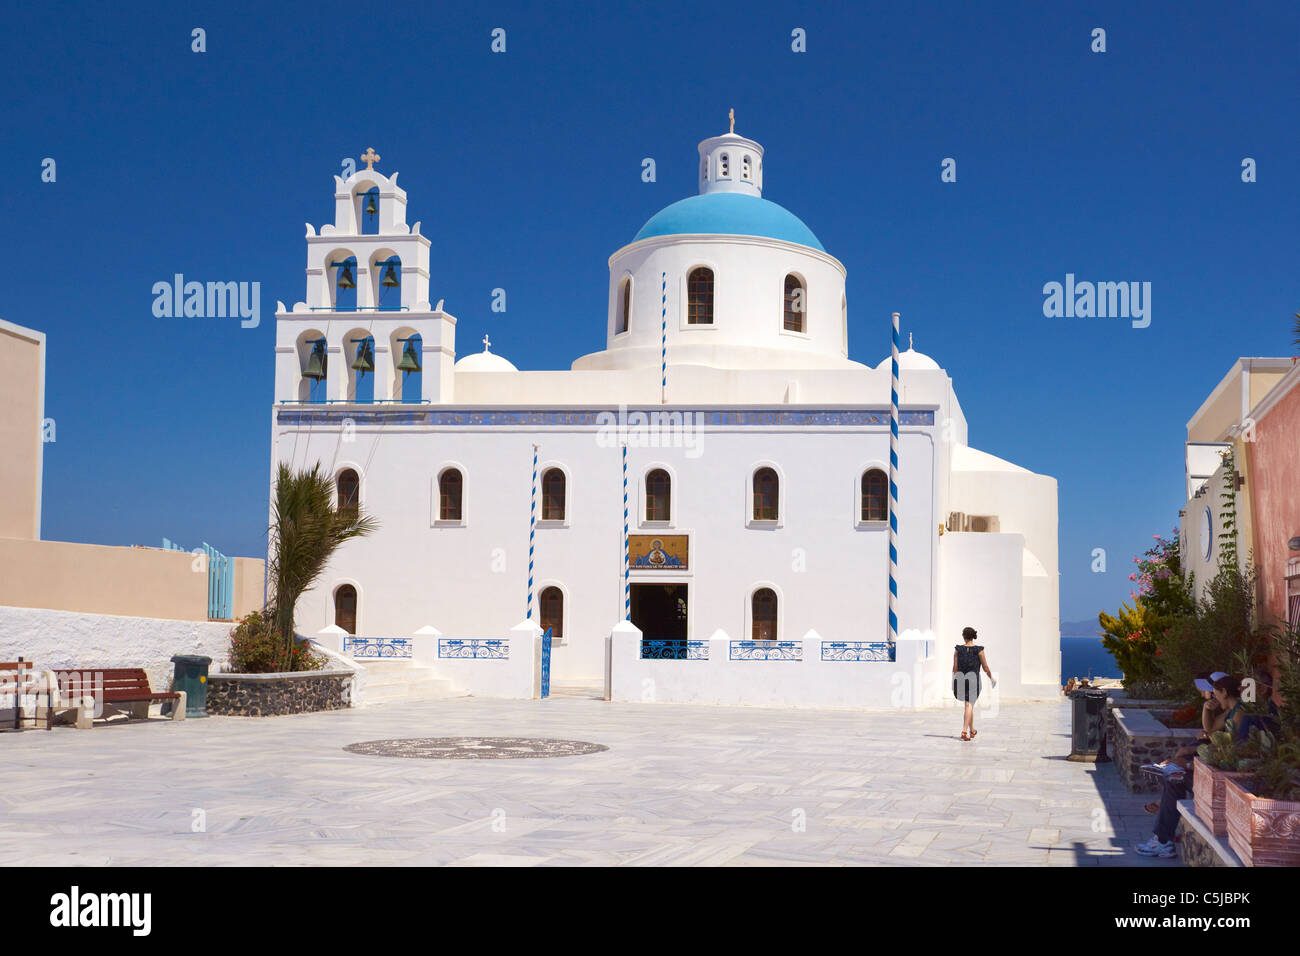 Greek church with bell tower in Oia Town, Santorini Island, Cyclades Islands, Greece Stock Photo